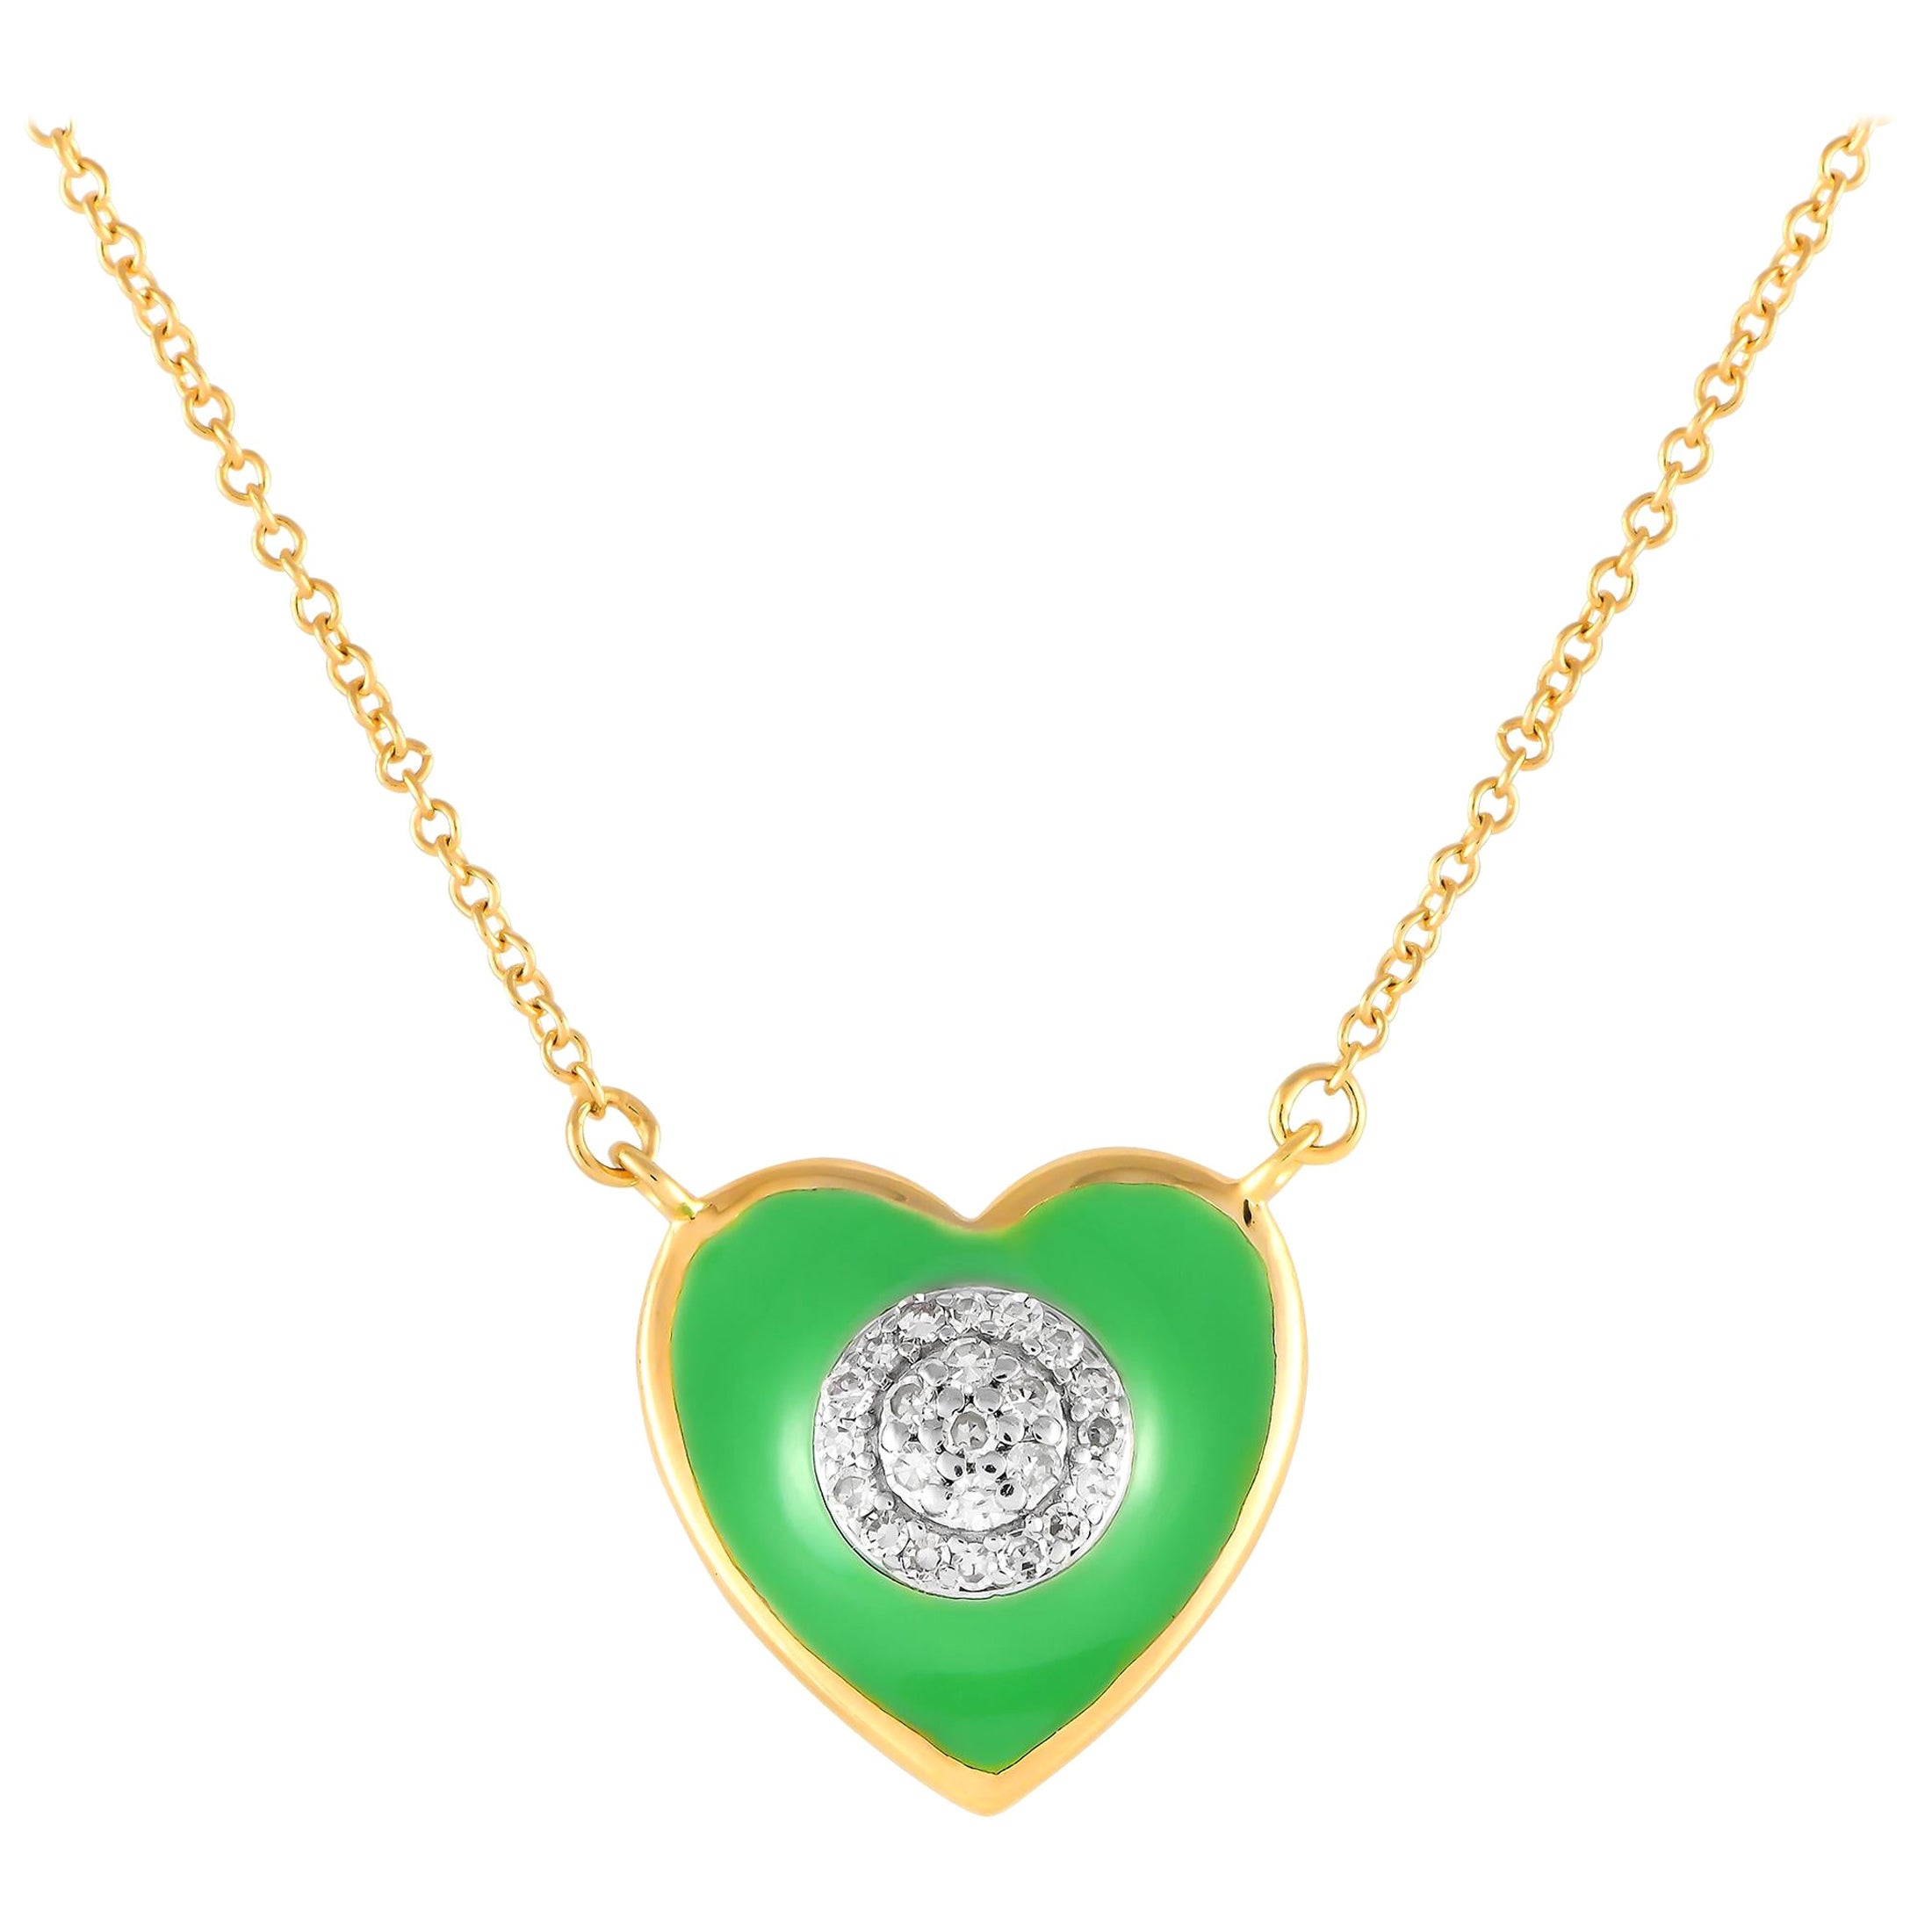 LB Exclusive 14K Yellow Gold Diamond & Green Enamel Heart Necklace PN15066 For Sale